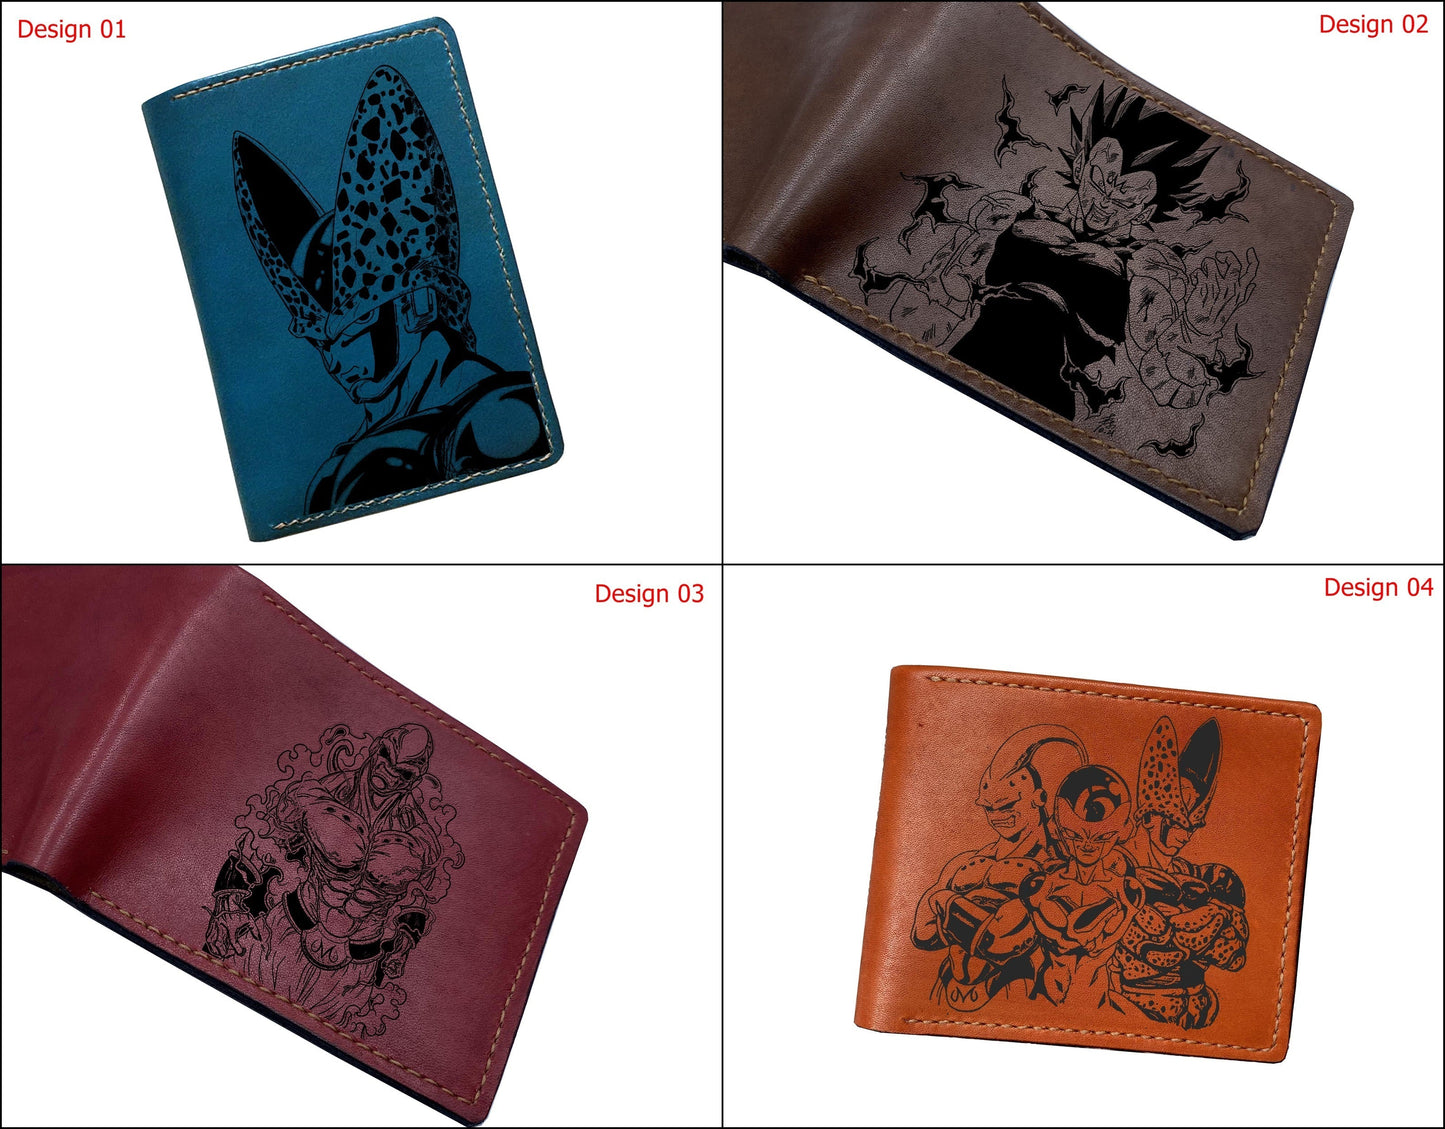 Mayan Corner - Dragon ball characters drawing leather wallet, fan art leather gift for men, wallet for him, leather anniversary present ideas -  Cell Android Villains